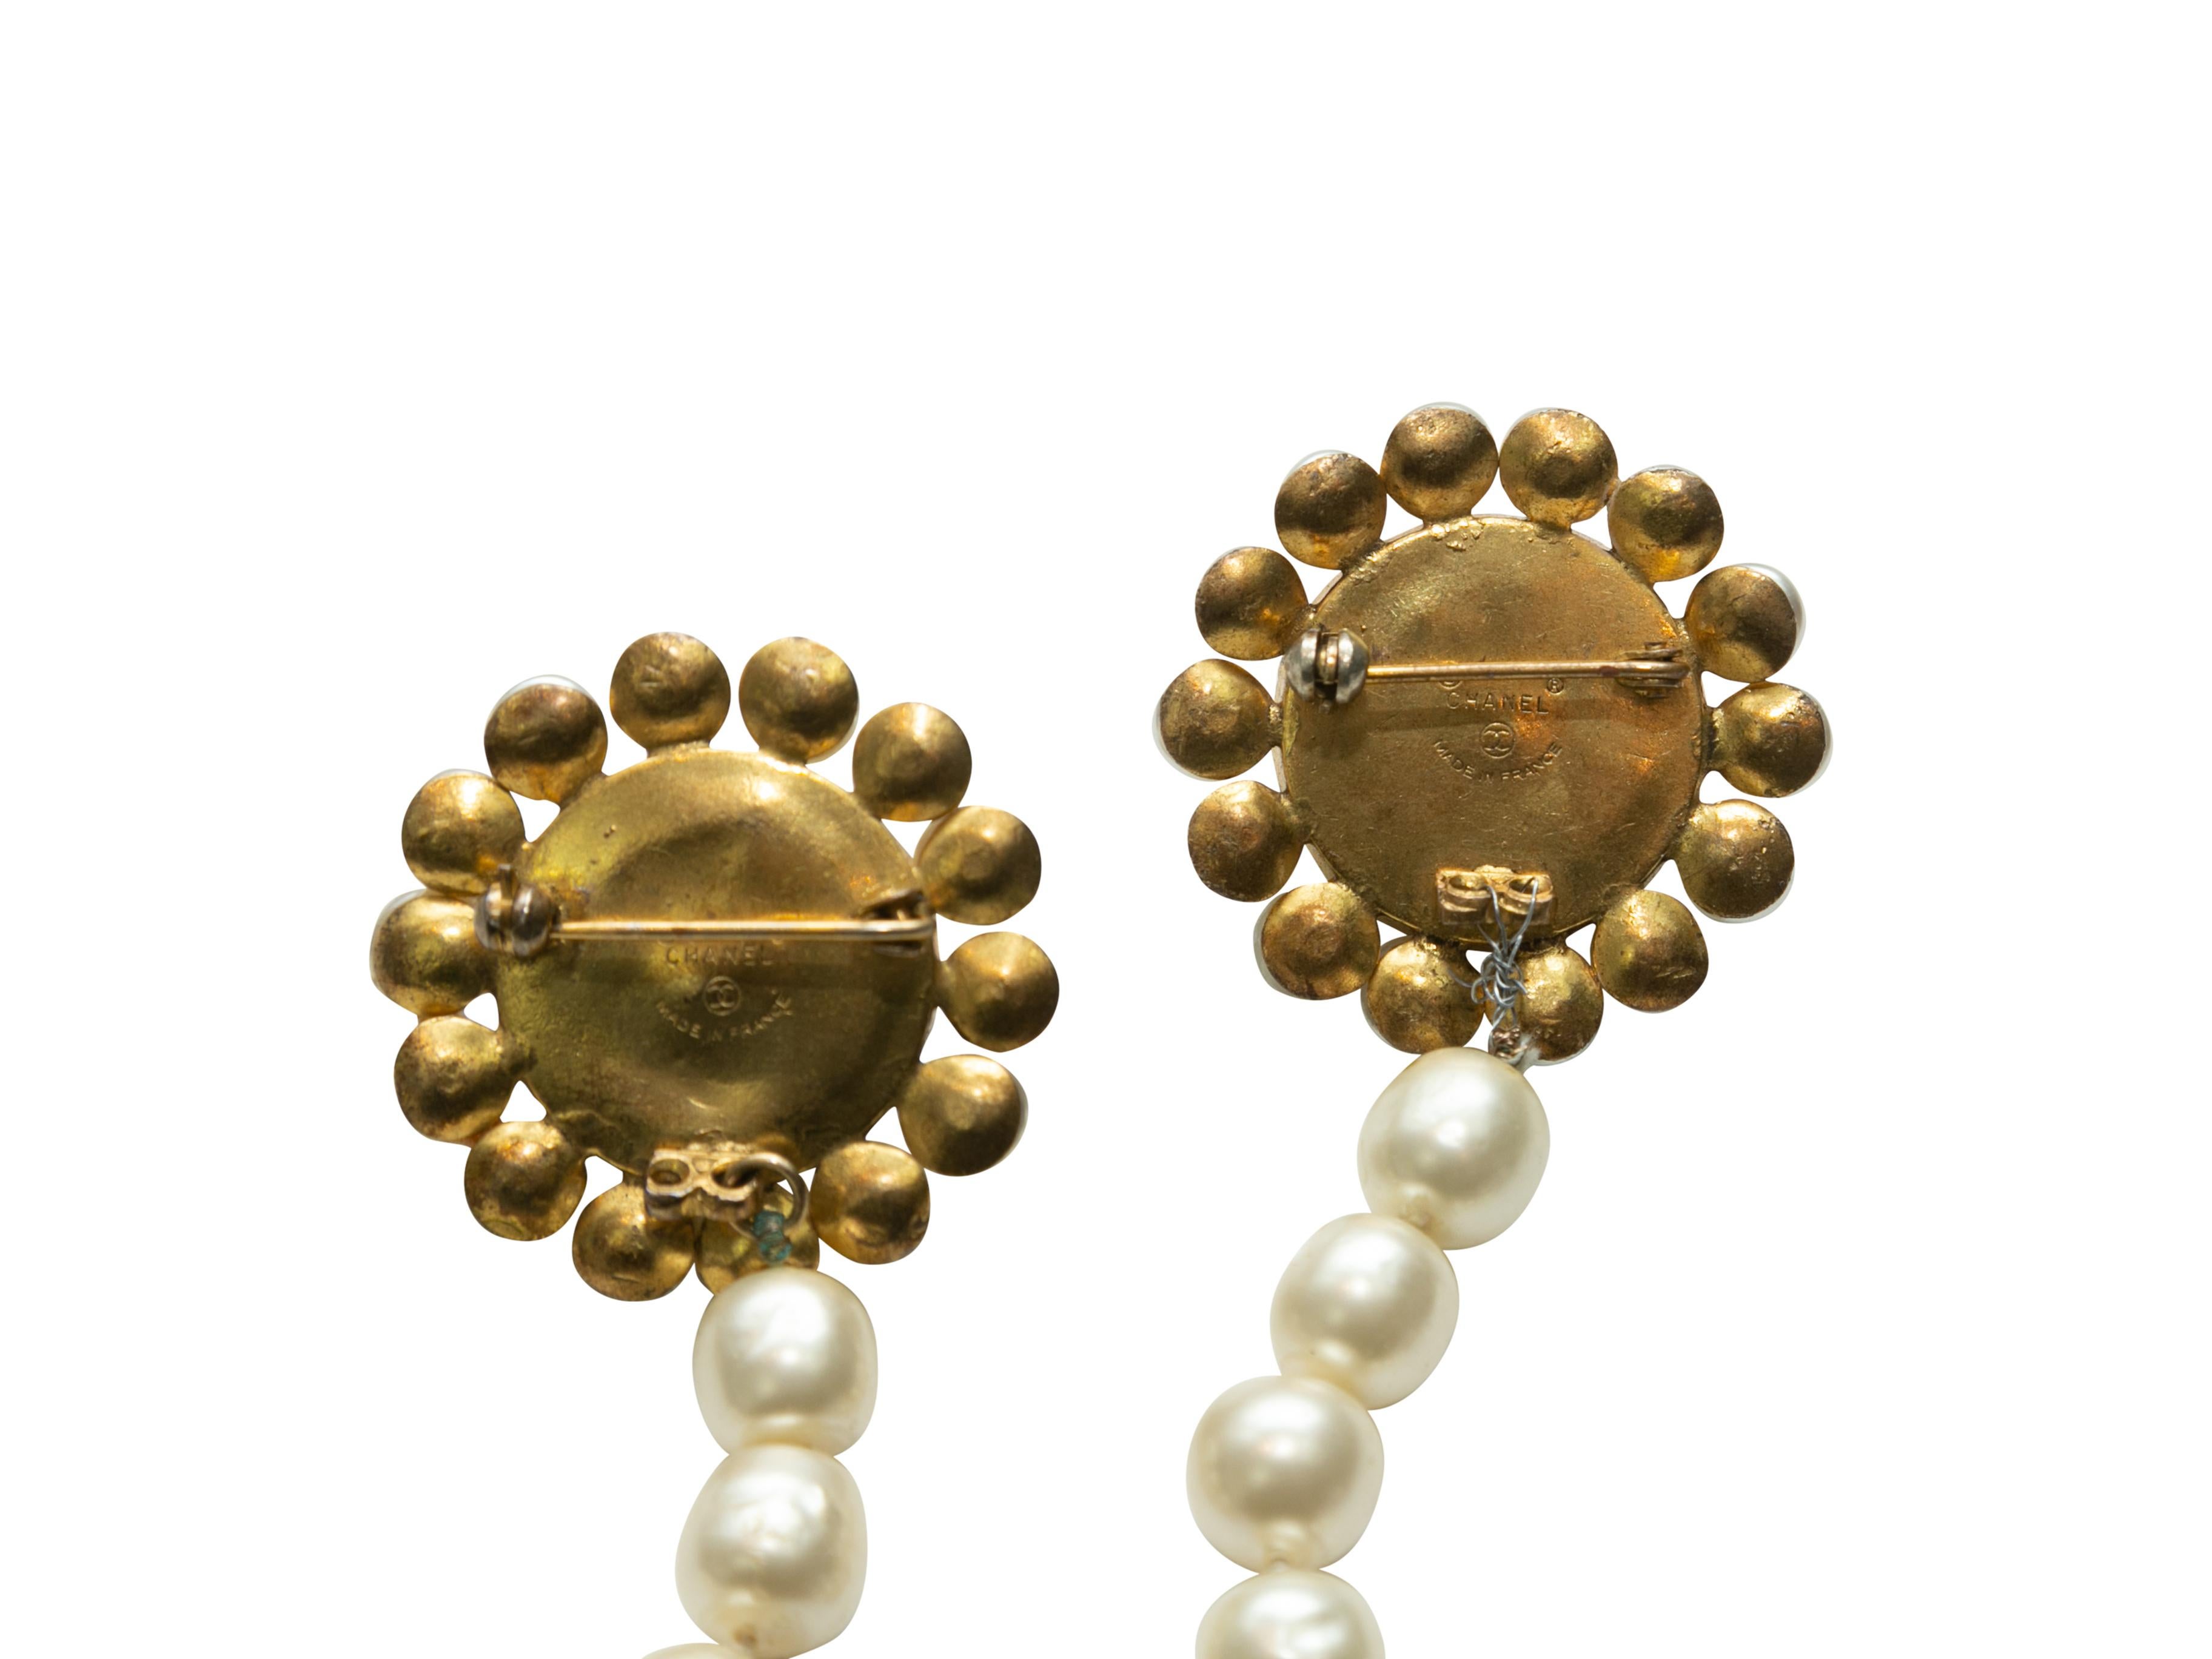 Product details: Vintage gold-tone and faux pearl CC double brooch by Chanel. 1.5